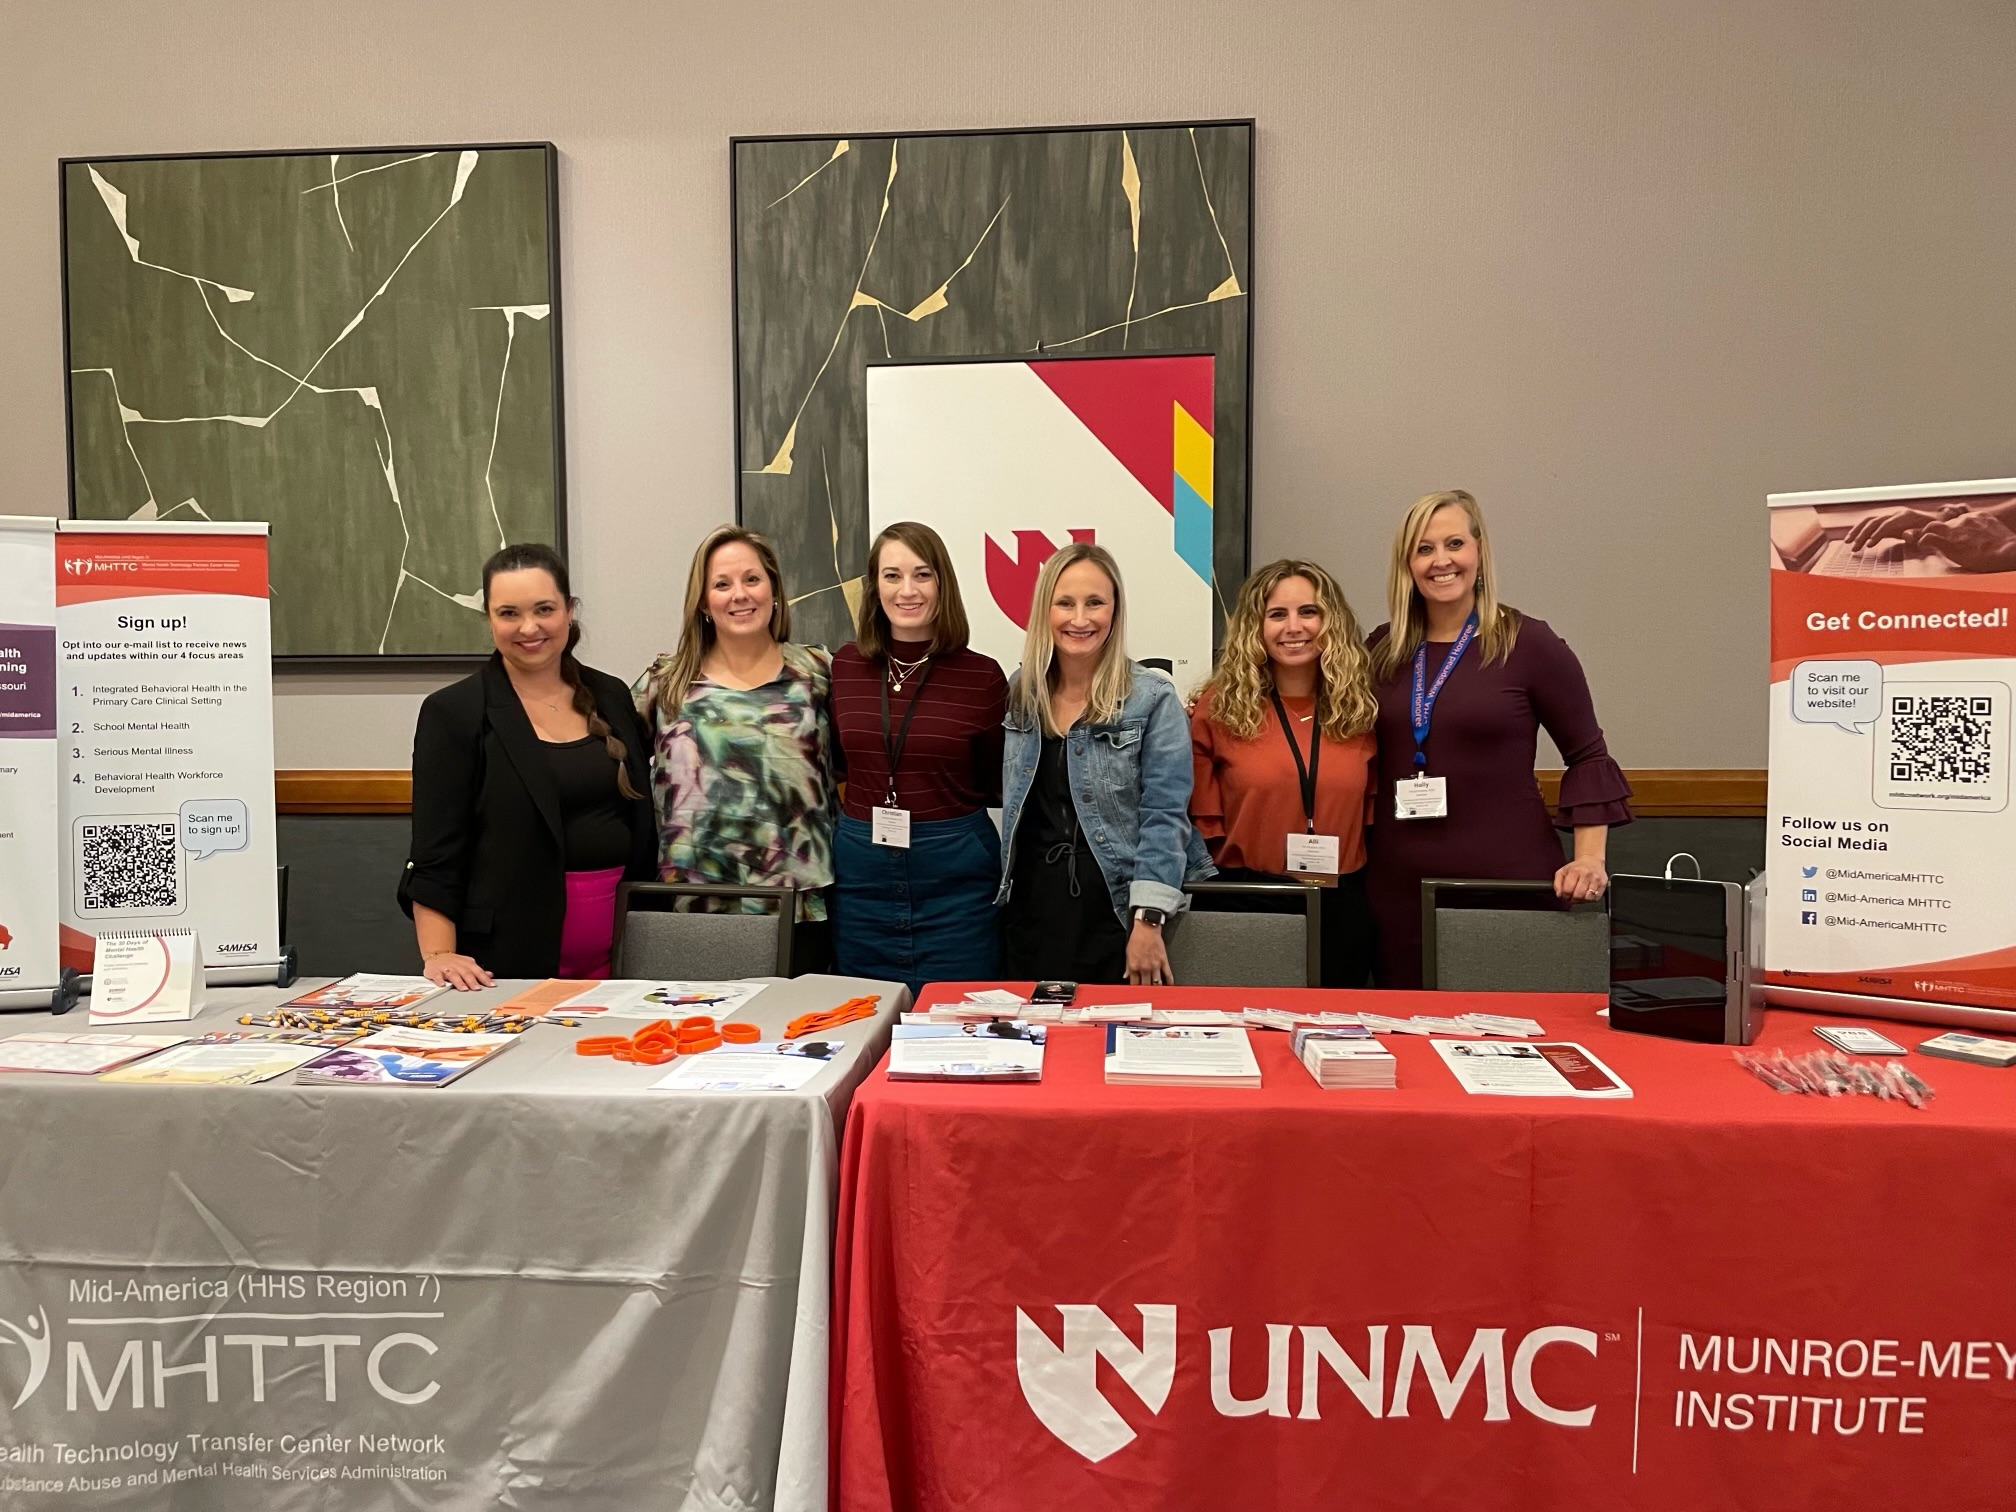 Members of the Mid-America MHTTC pose behind a booth at a conference. 